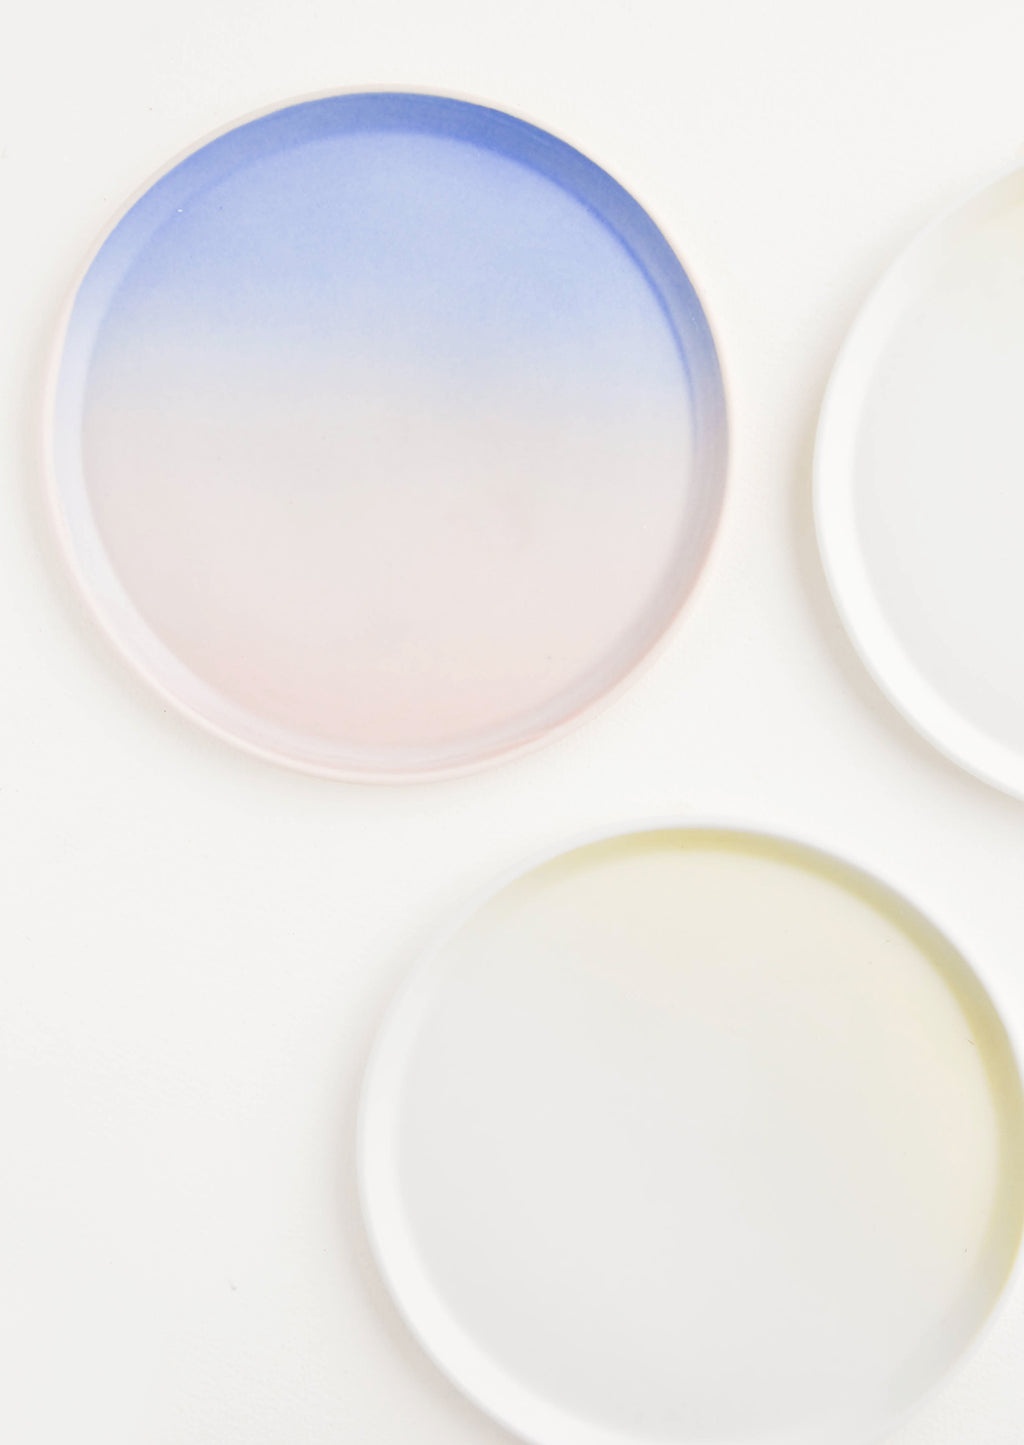 4: Three colorful ombre porcelain plates.